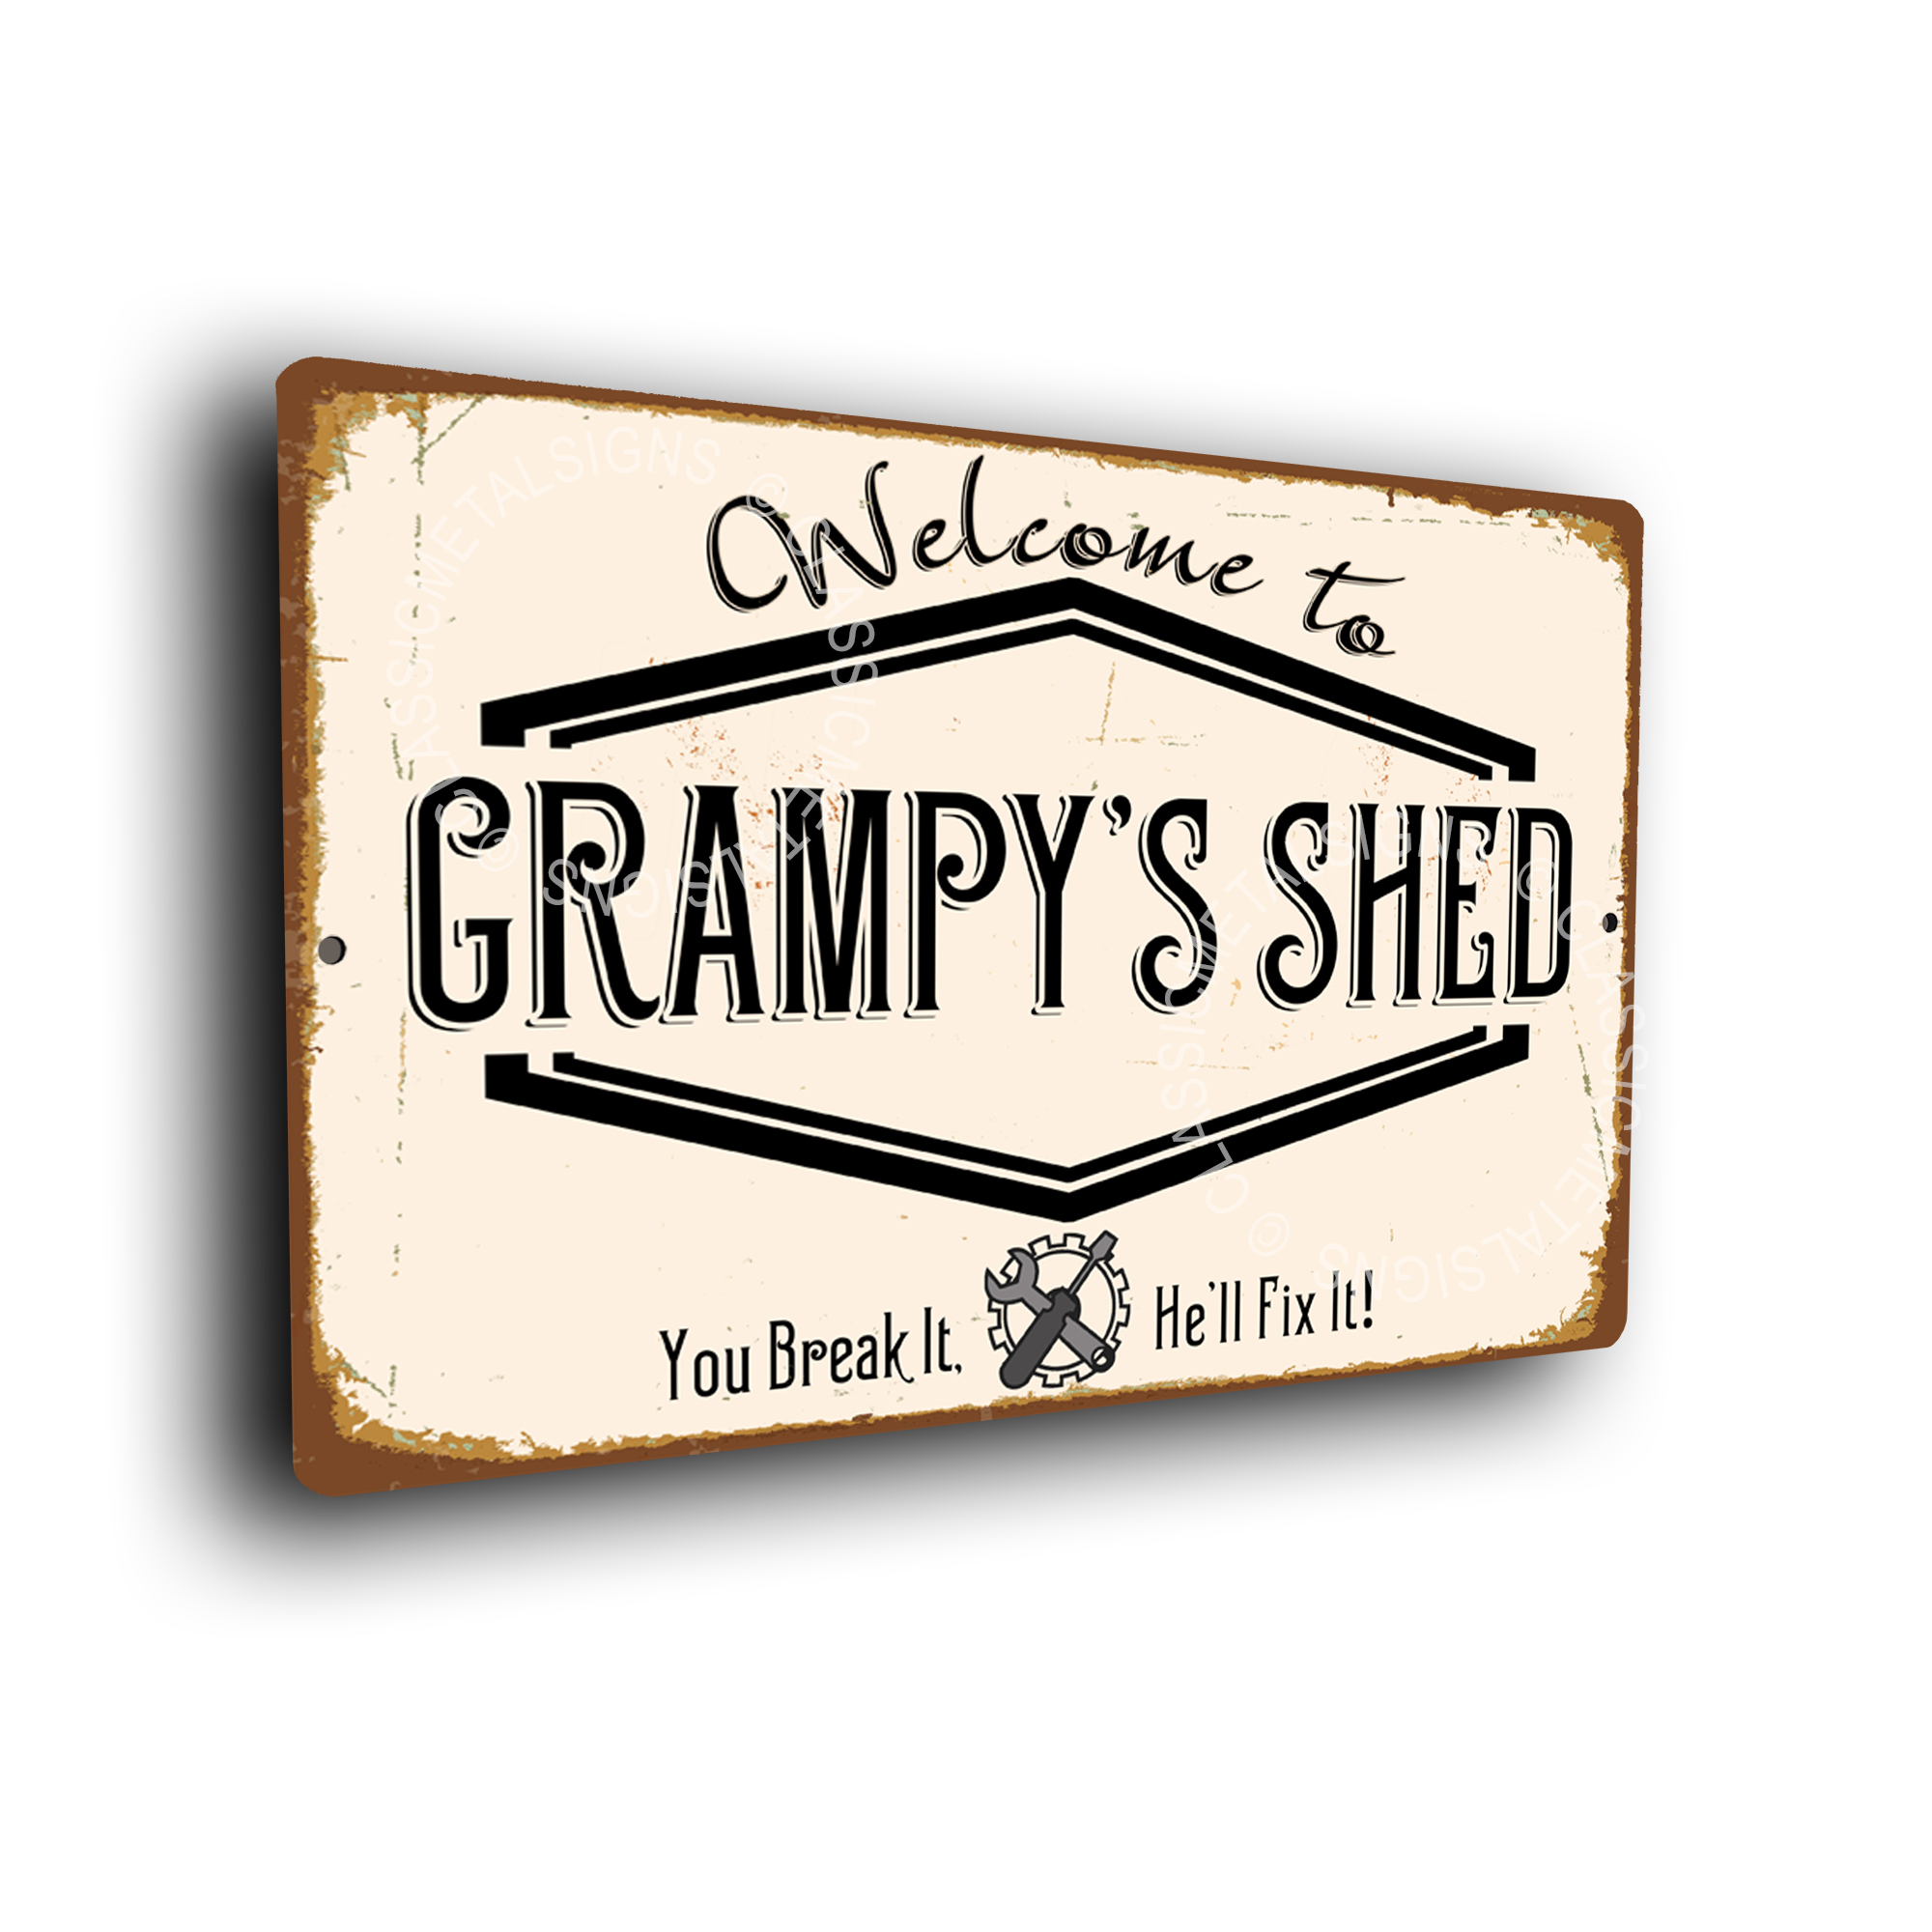 Grampy's Shed Signs